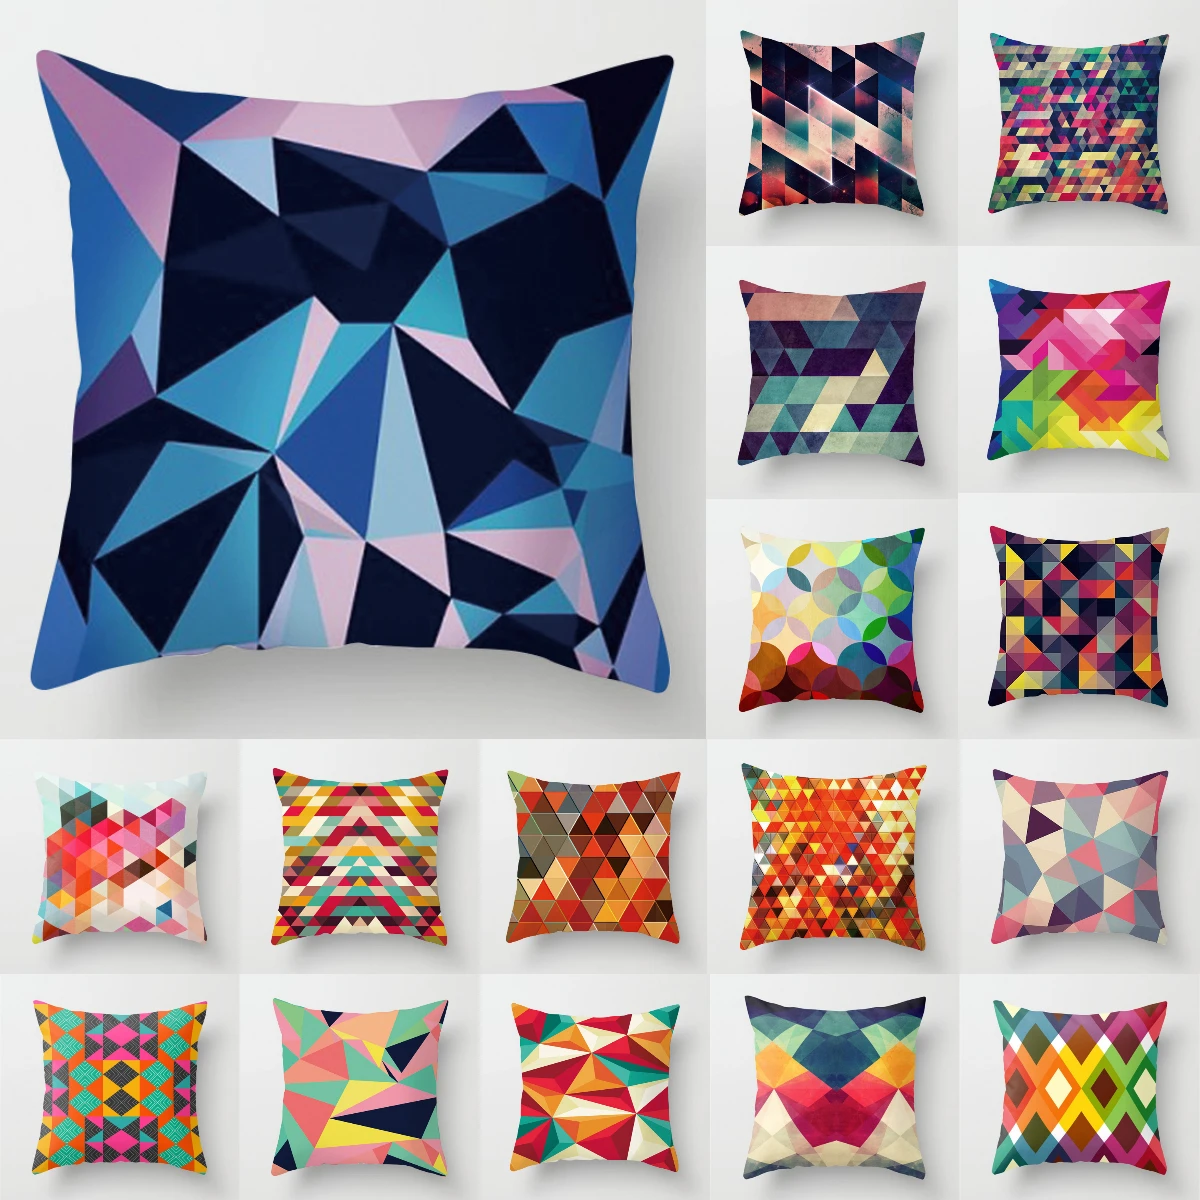 

NEW Nordic Fantasy Colorful Geometric Cushion Cover Super Hot Polyester Lattice Print Pillow Cover Sofa Couch Decorative Pillow